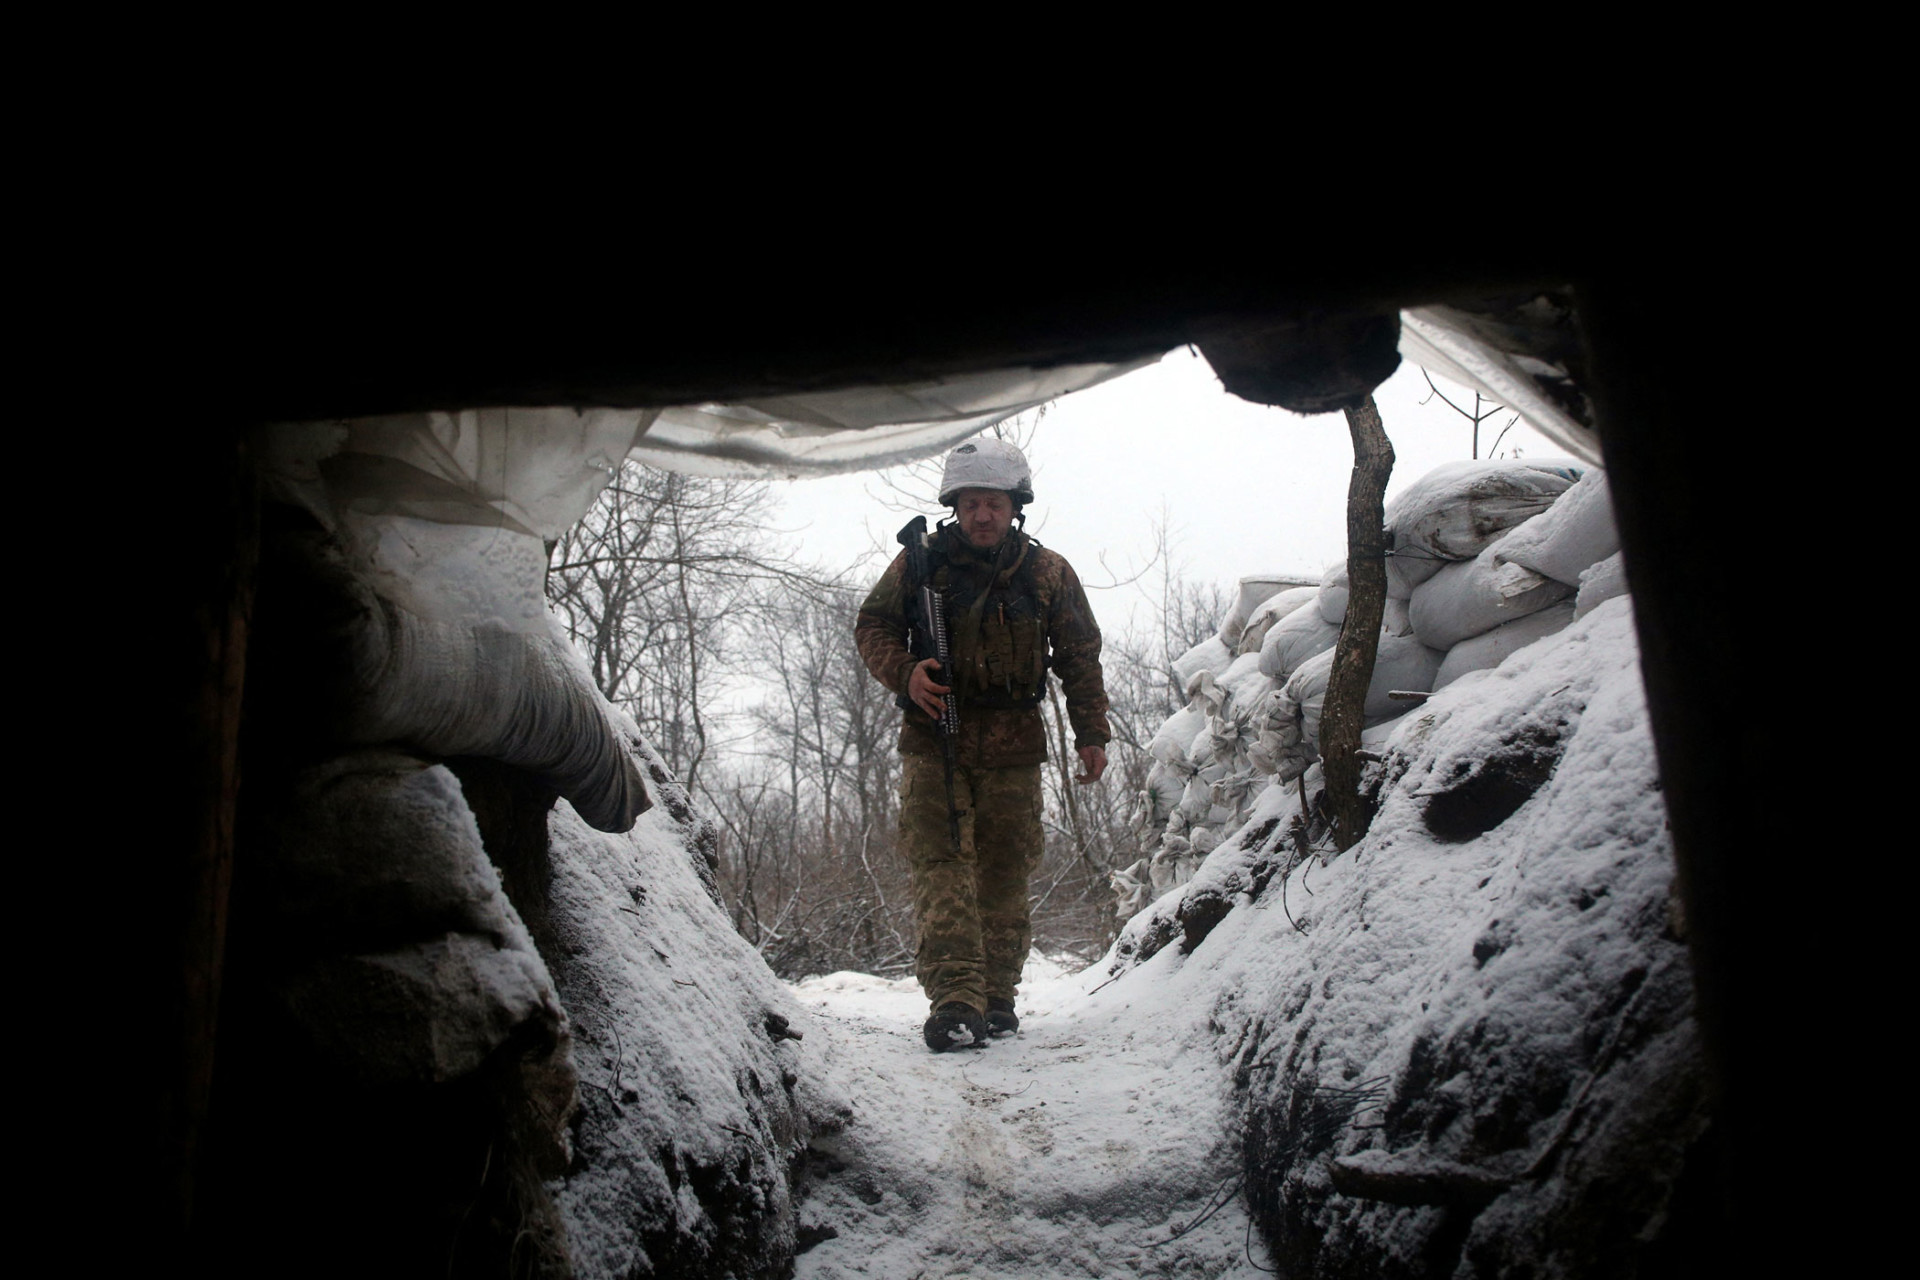 In Kyiv, War is Both Remote and Ever-Present